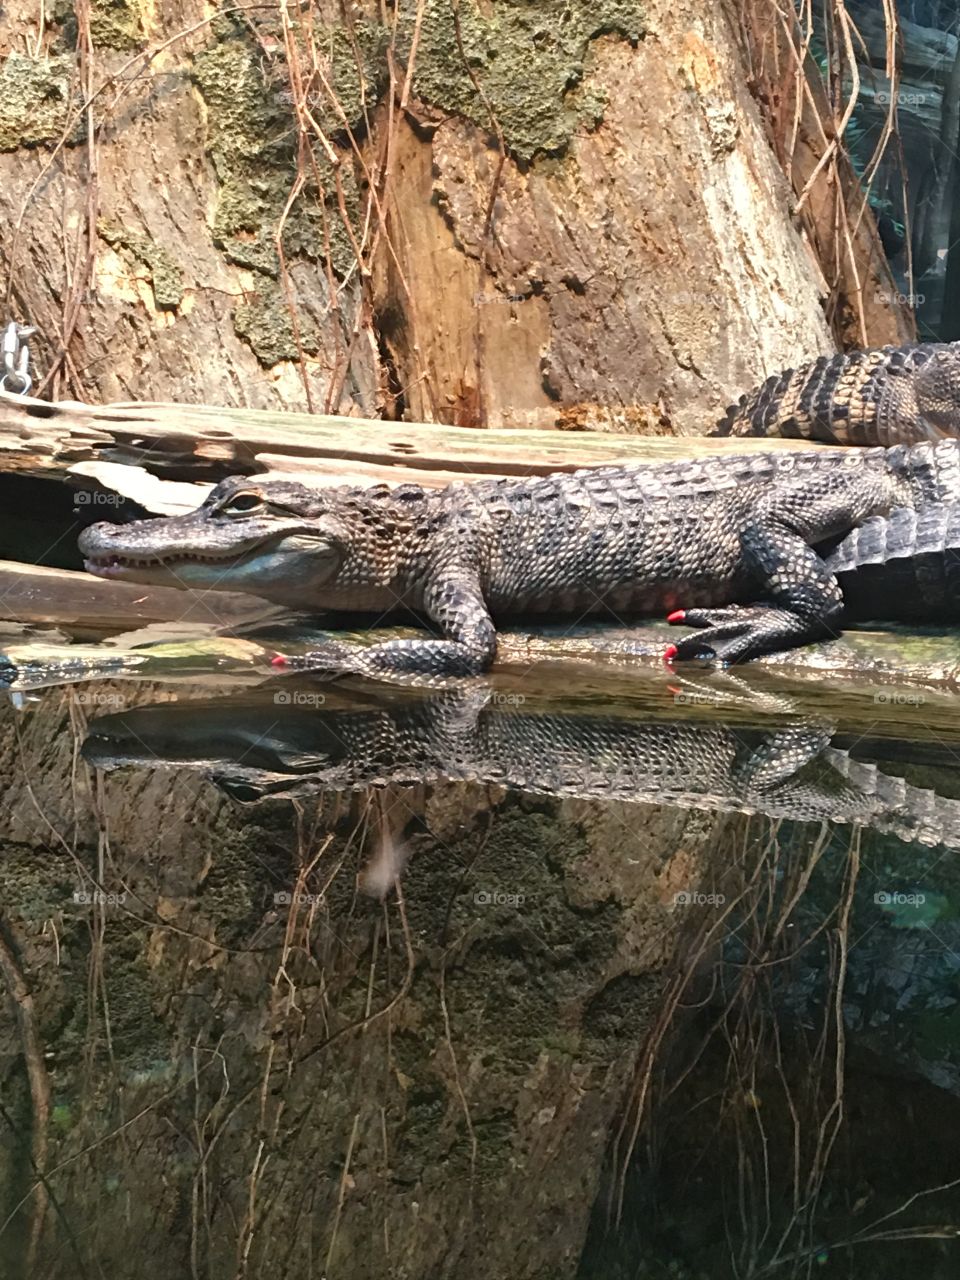 An alligator with rubber nails on at the Tennessee Aquarium. He’s in one of the exhibits there. 